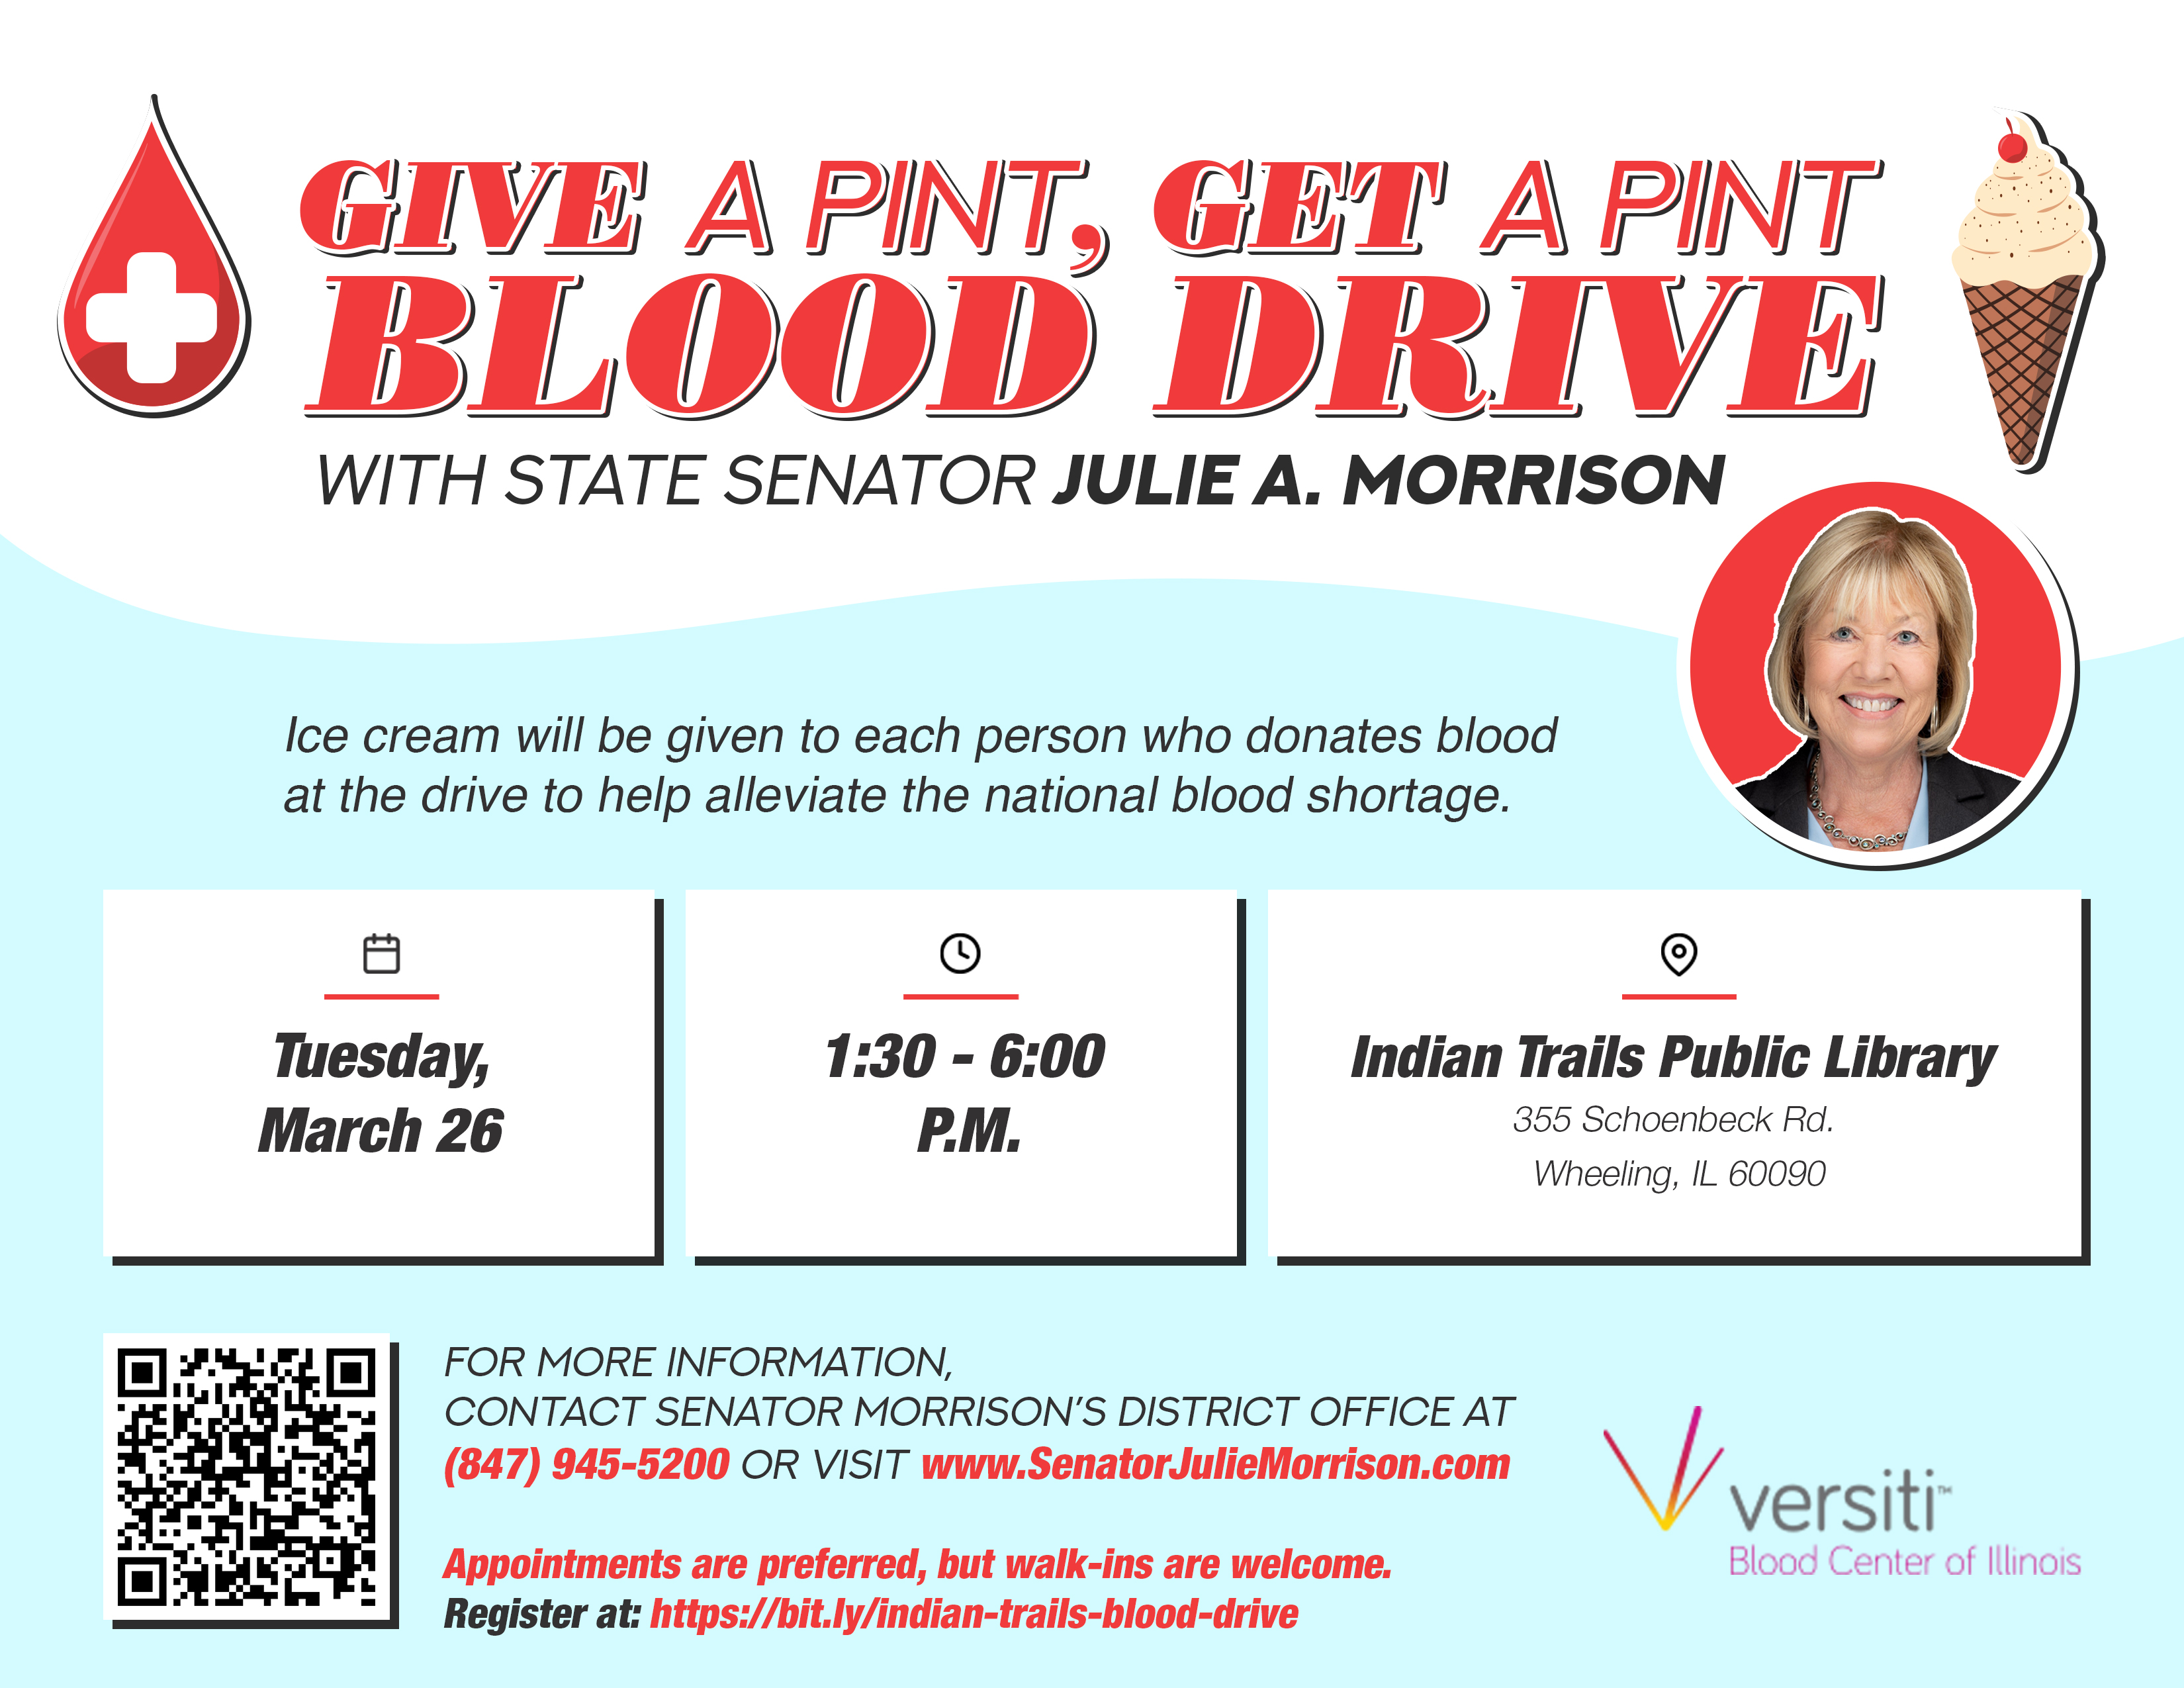 Informational graphic about the blood drive